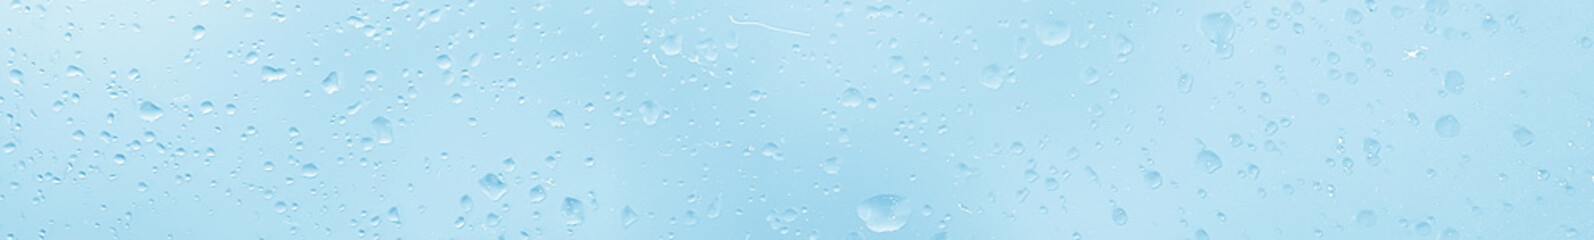 glass drops long narrow oblong background / abstract horizontal web background